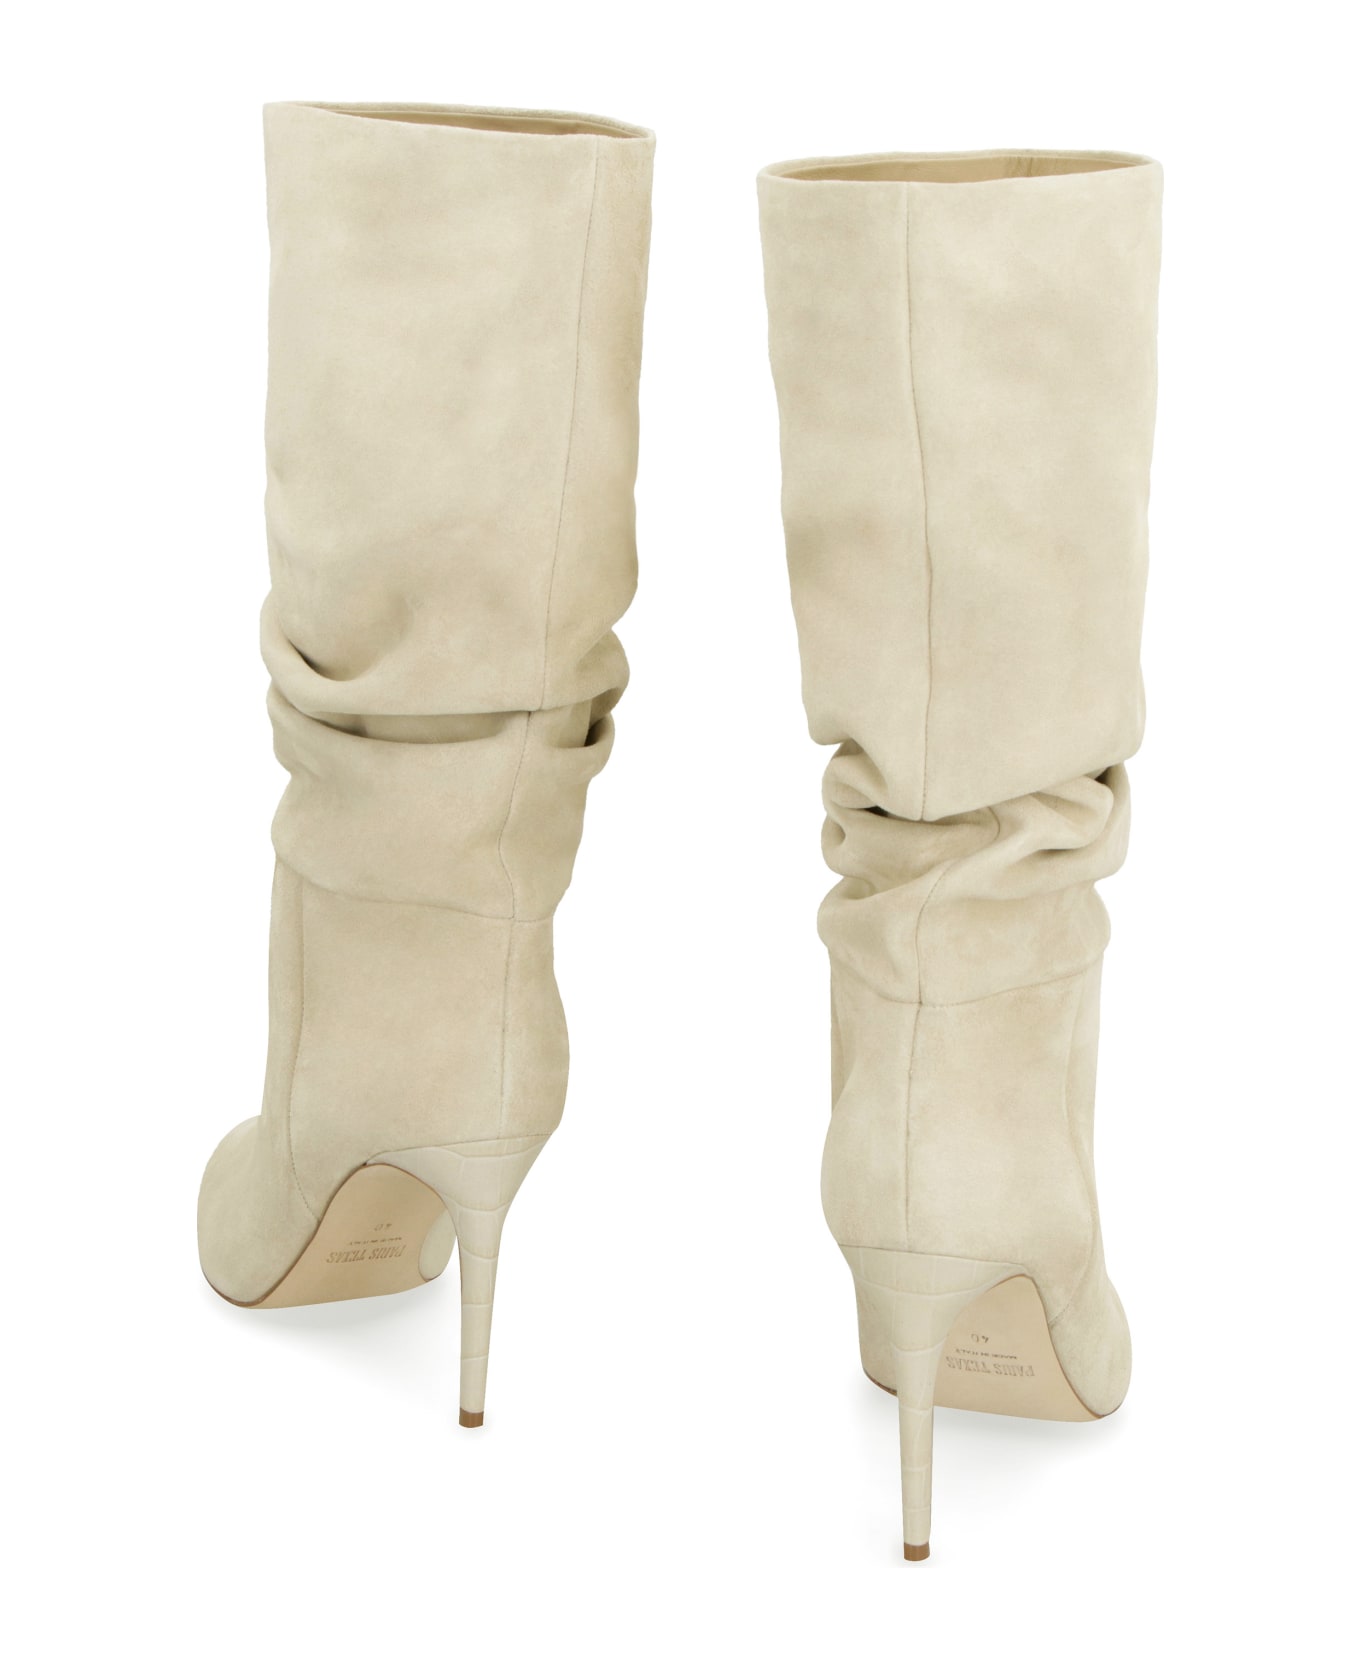 Paris Texas Slouchy Suede Knee High Boots - Ivory